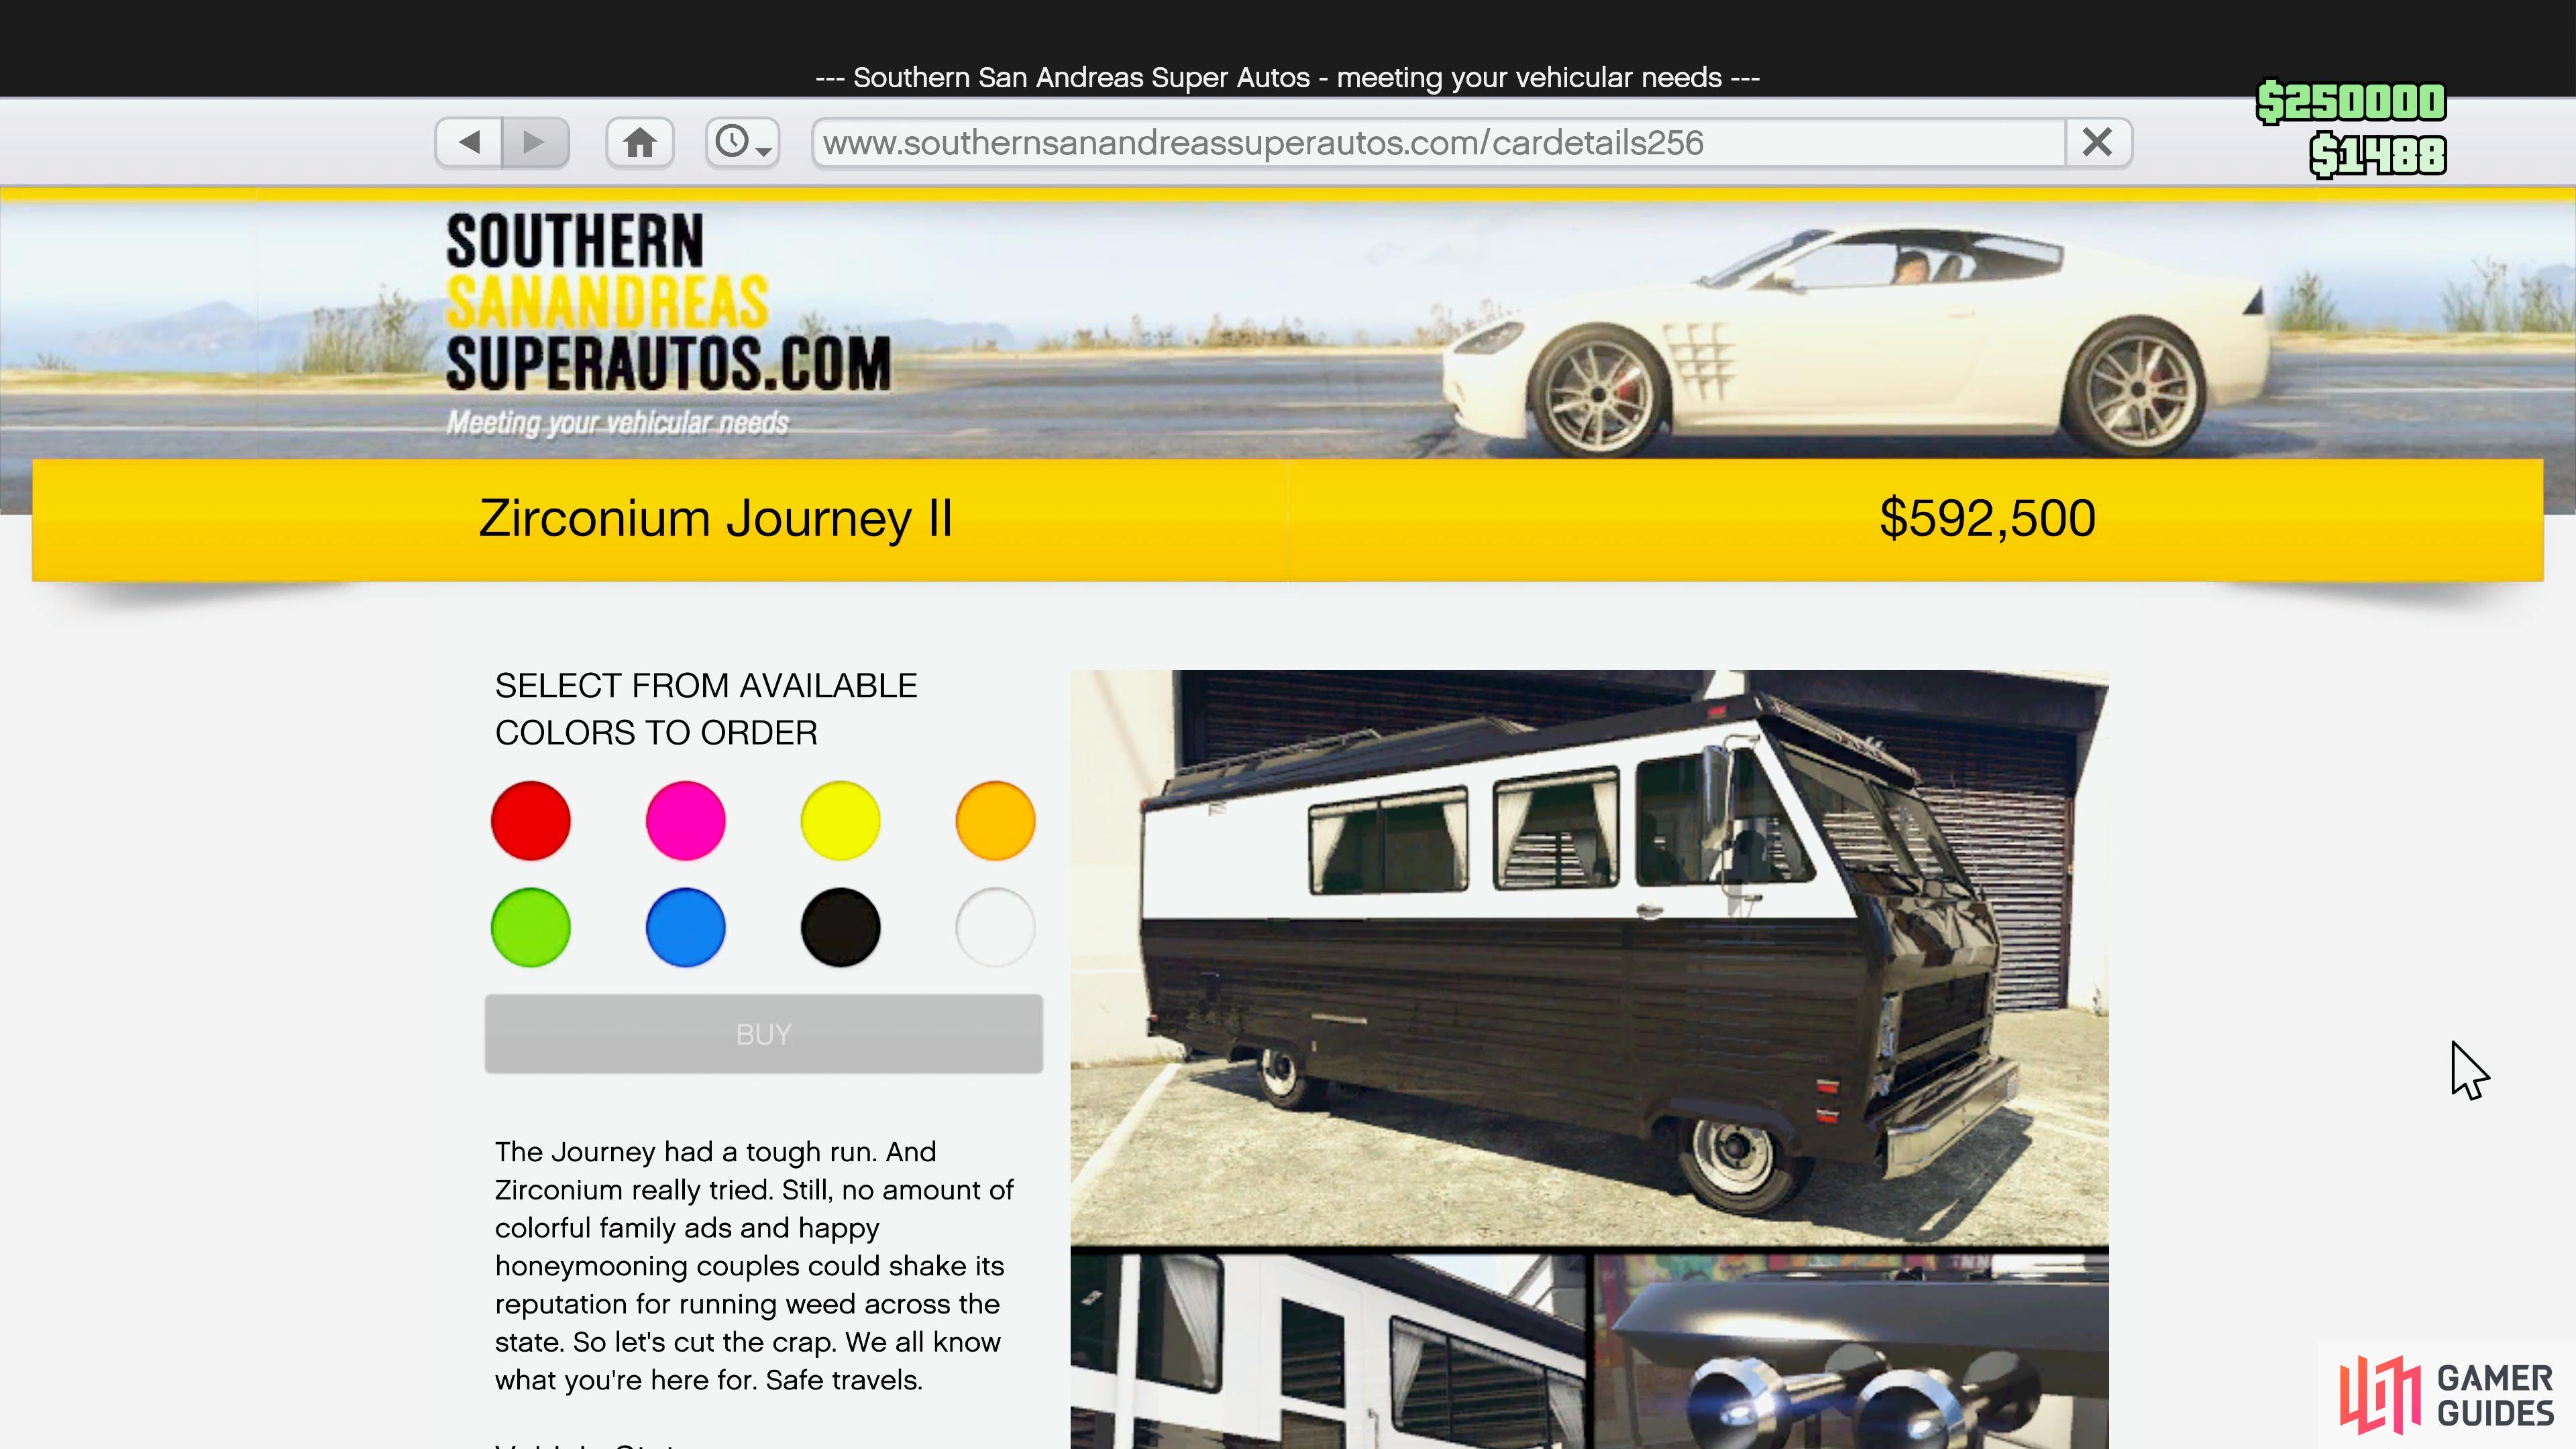 You can purchase the Zirconium journey II from the Southern San Andreas Super Auto.